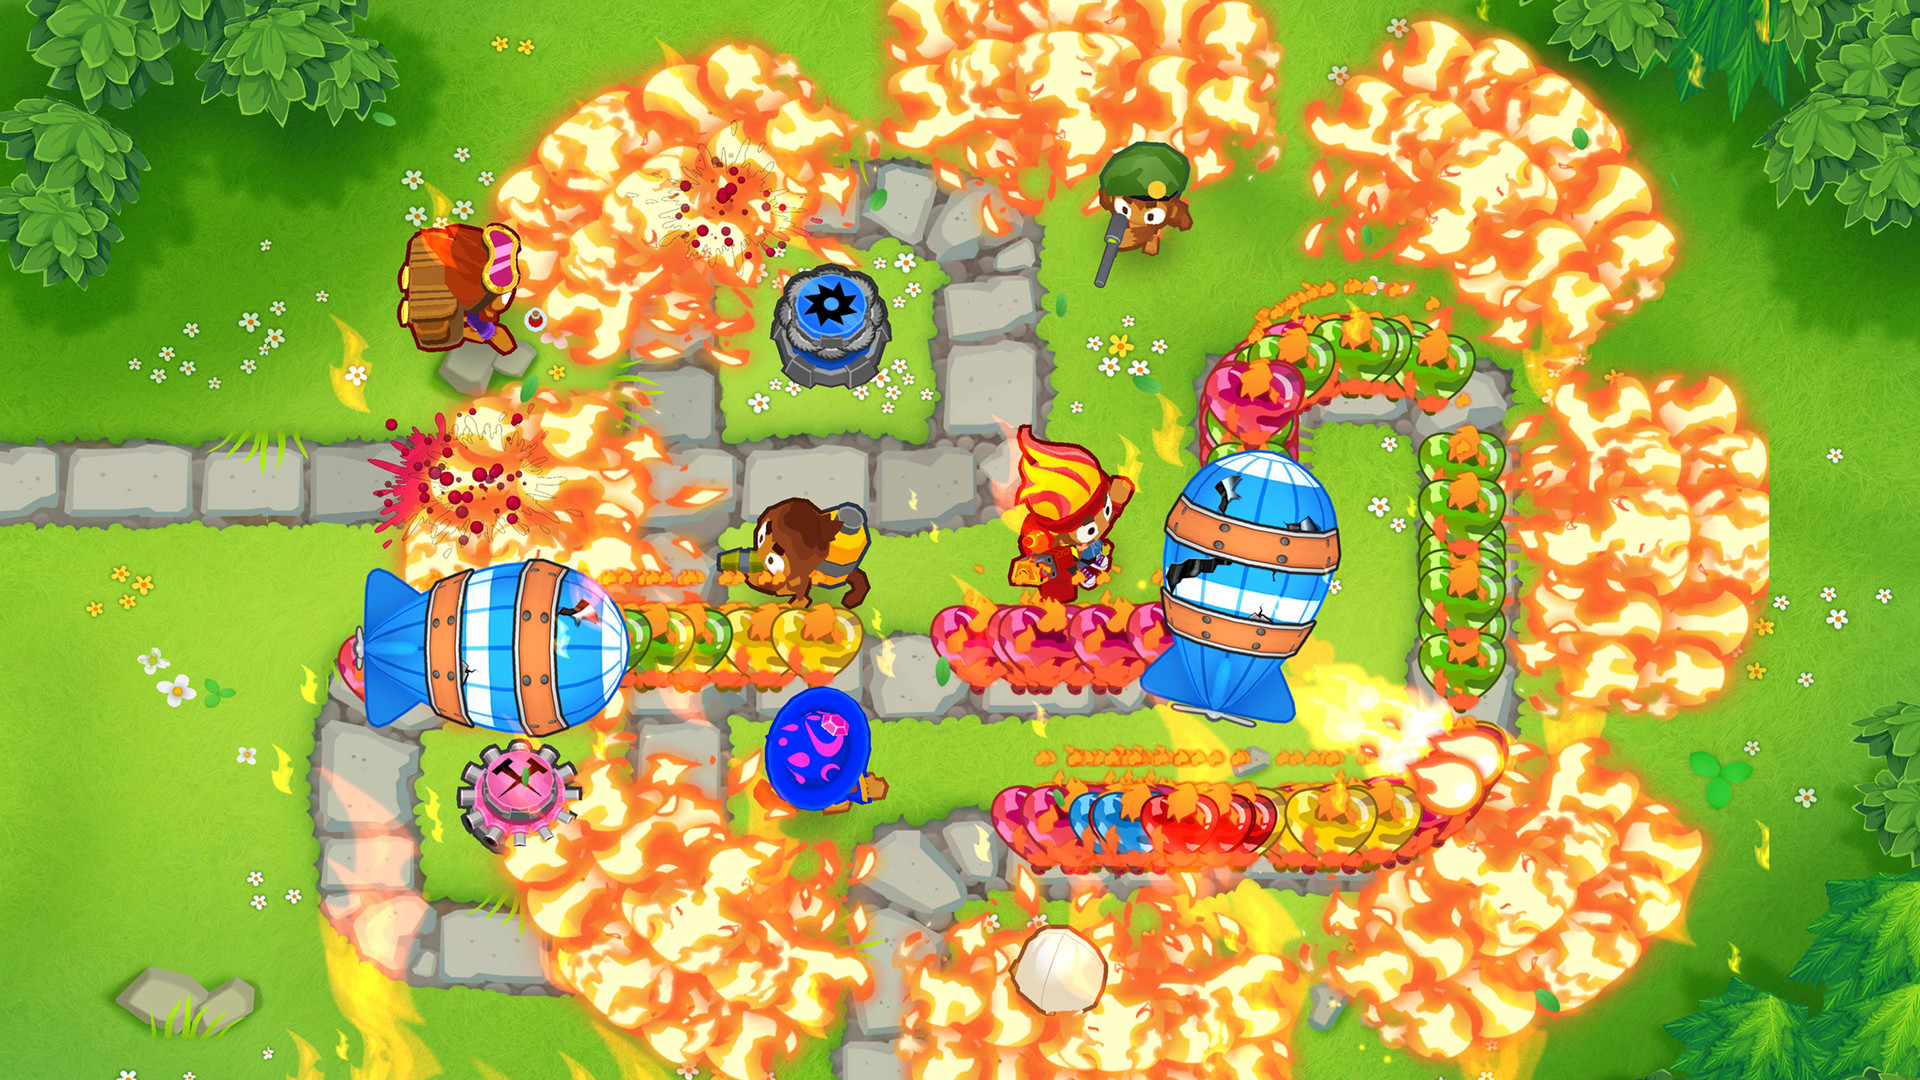 HD desktop wallpaper of Bloons TD 6 game featuring colorful monkey towers defending against balloons on a vibrant battlefield.